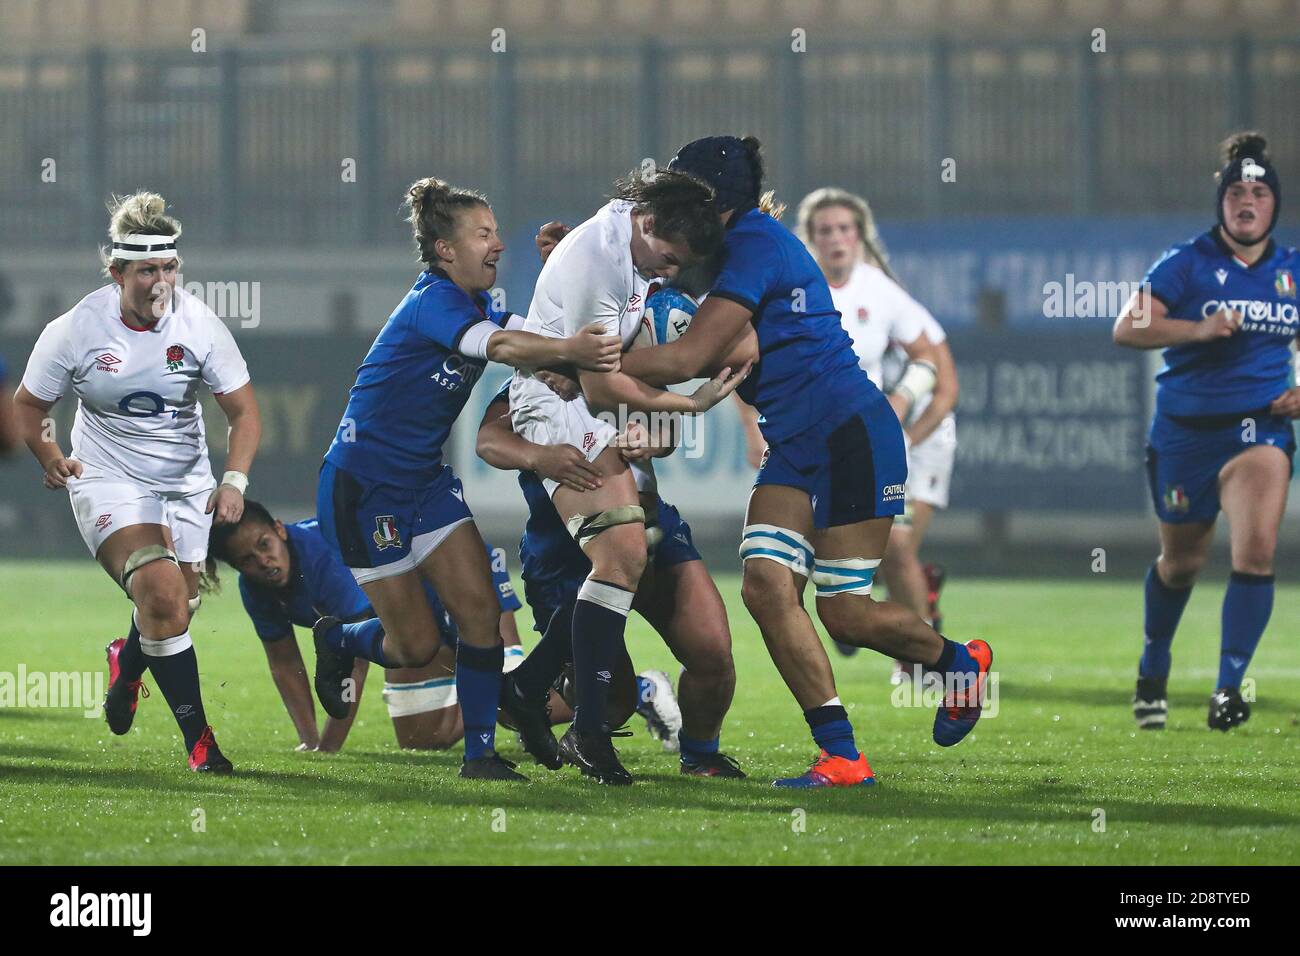 Parma, Italy. 1st Nov, 2020. parma, Italy, Sergio Lanfranchi stadium, 01 Nov 2020, England n8 Sarah Beckett carries the ball during Women 2020 - Italy vs England - Rugby Six Nations match - Credit: LM/Massimiliano Carnabuci Credit: Massimiliano Carnabuci/LPS/ZUMA Wire/Alamy Live News Stock Photo